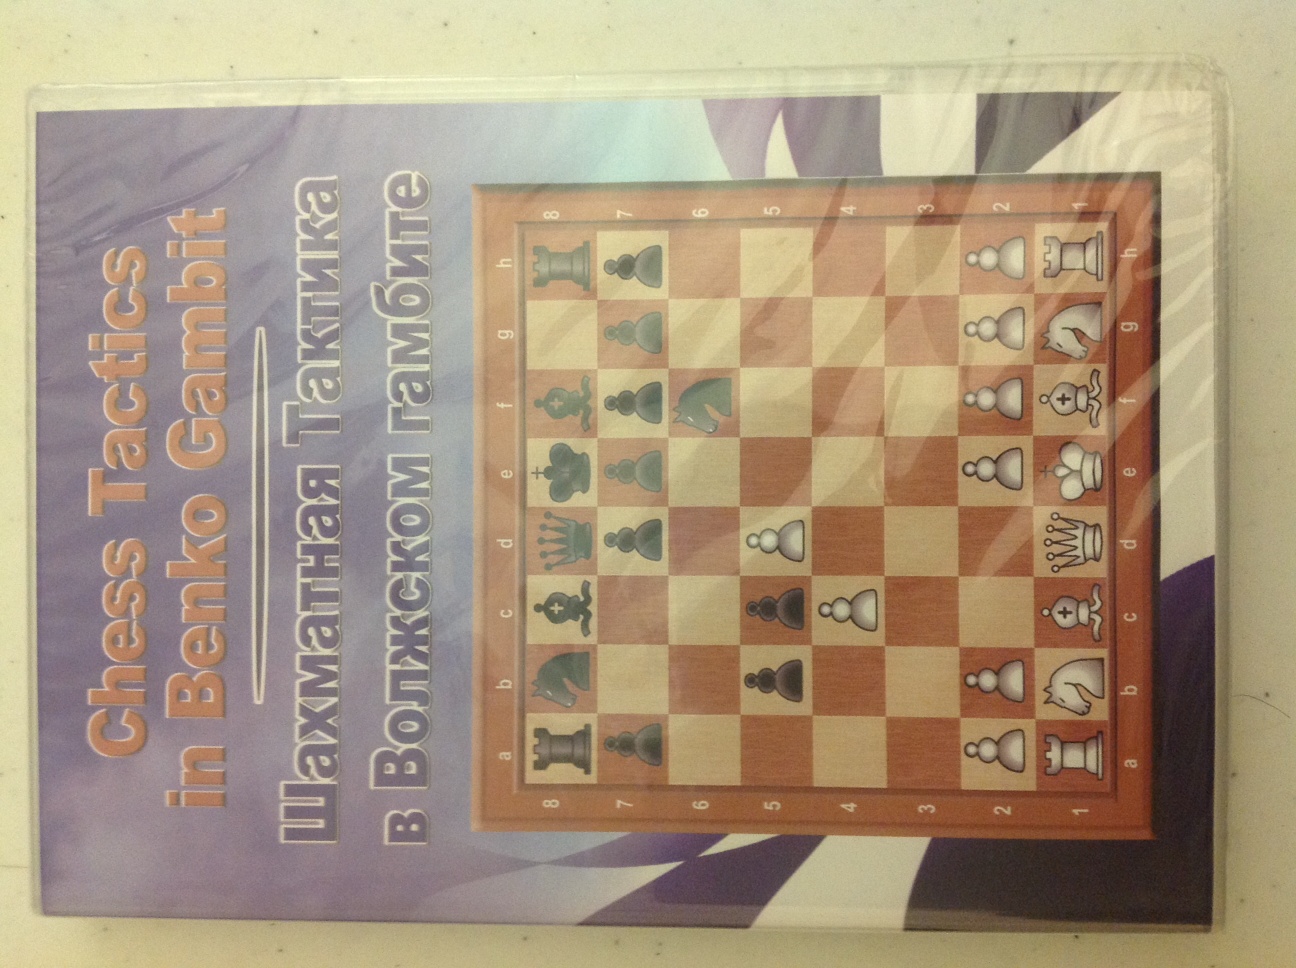 The Basics Of Chess Openings- Play With The Best Chess Openings And  Strategies : Encyclopedia Of Chess Openings (Paperback) 